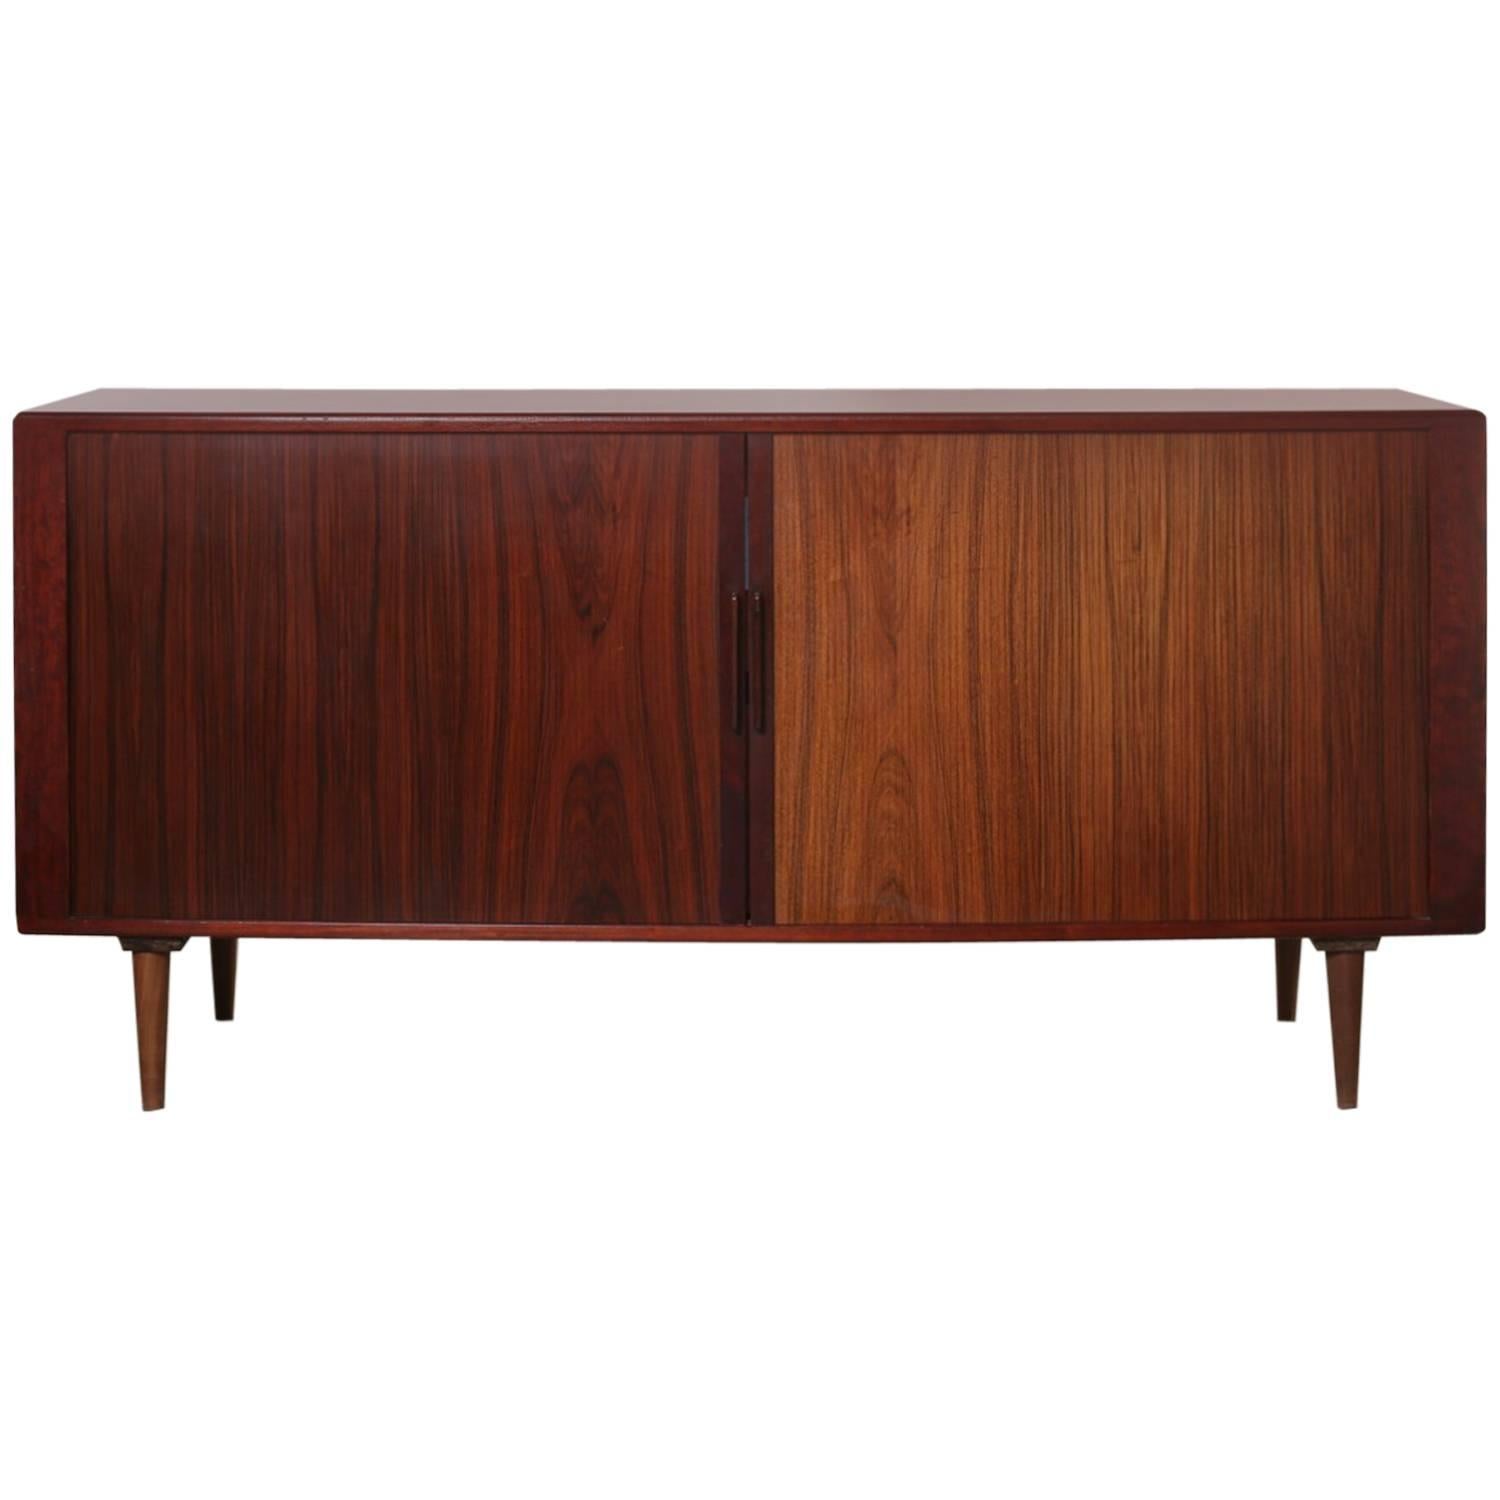 Rosewood Credenza Cabinet with Tambour Doors Made in Denmark by H. P. Hansen